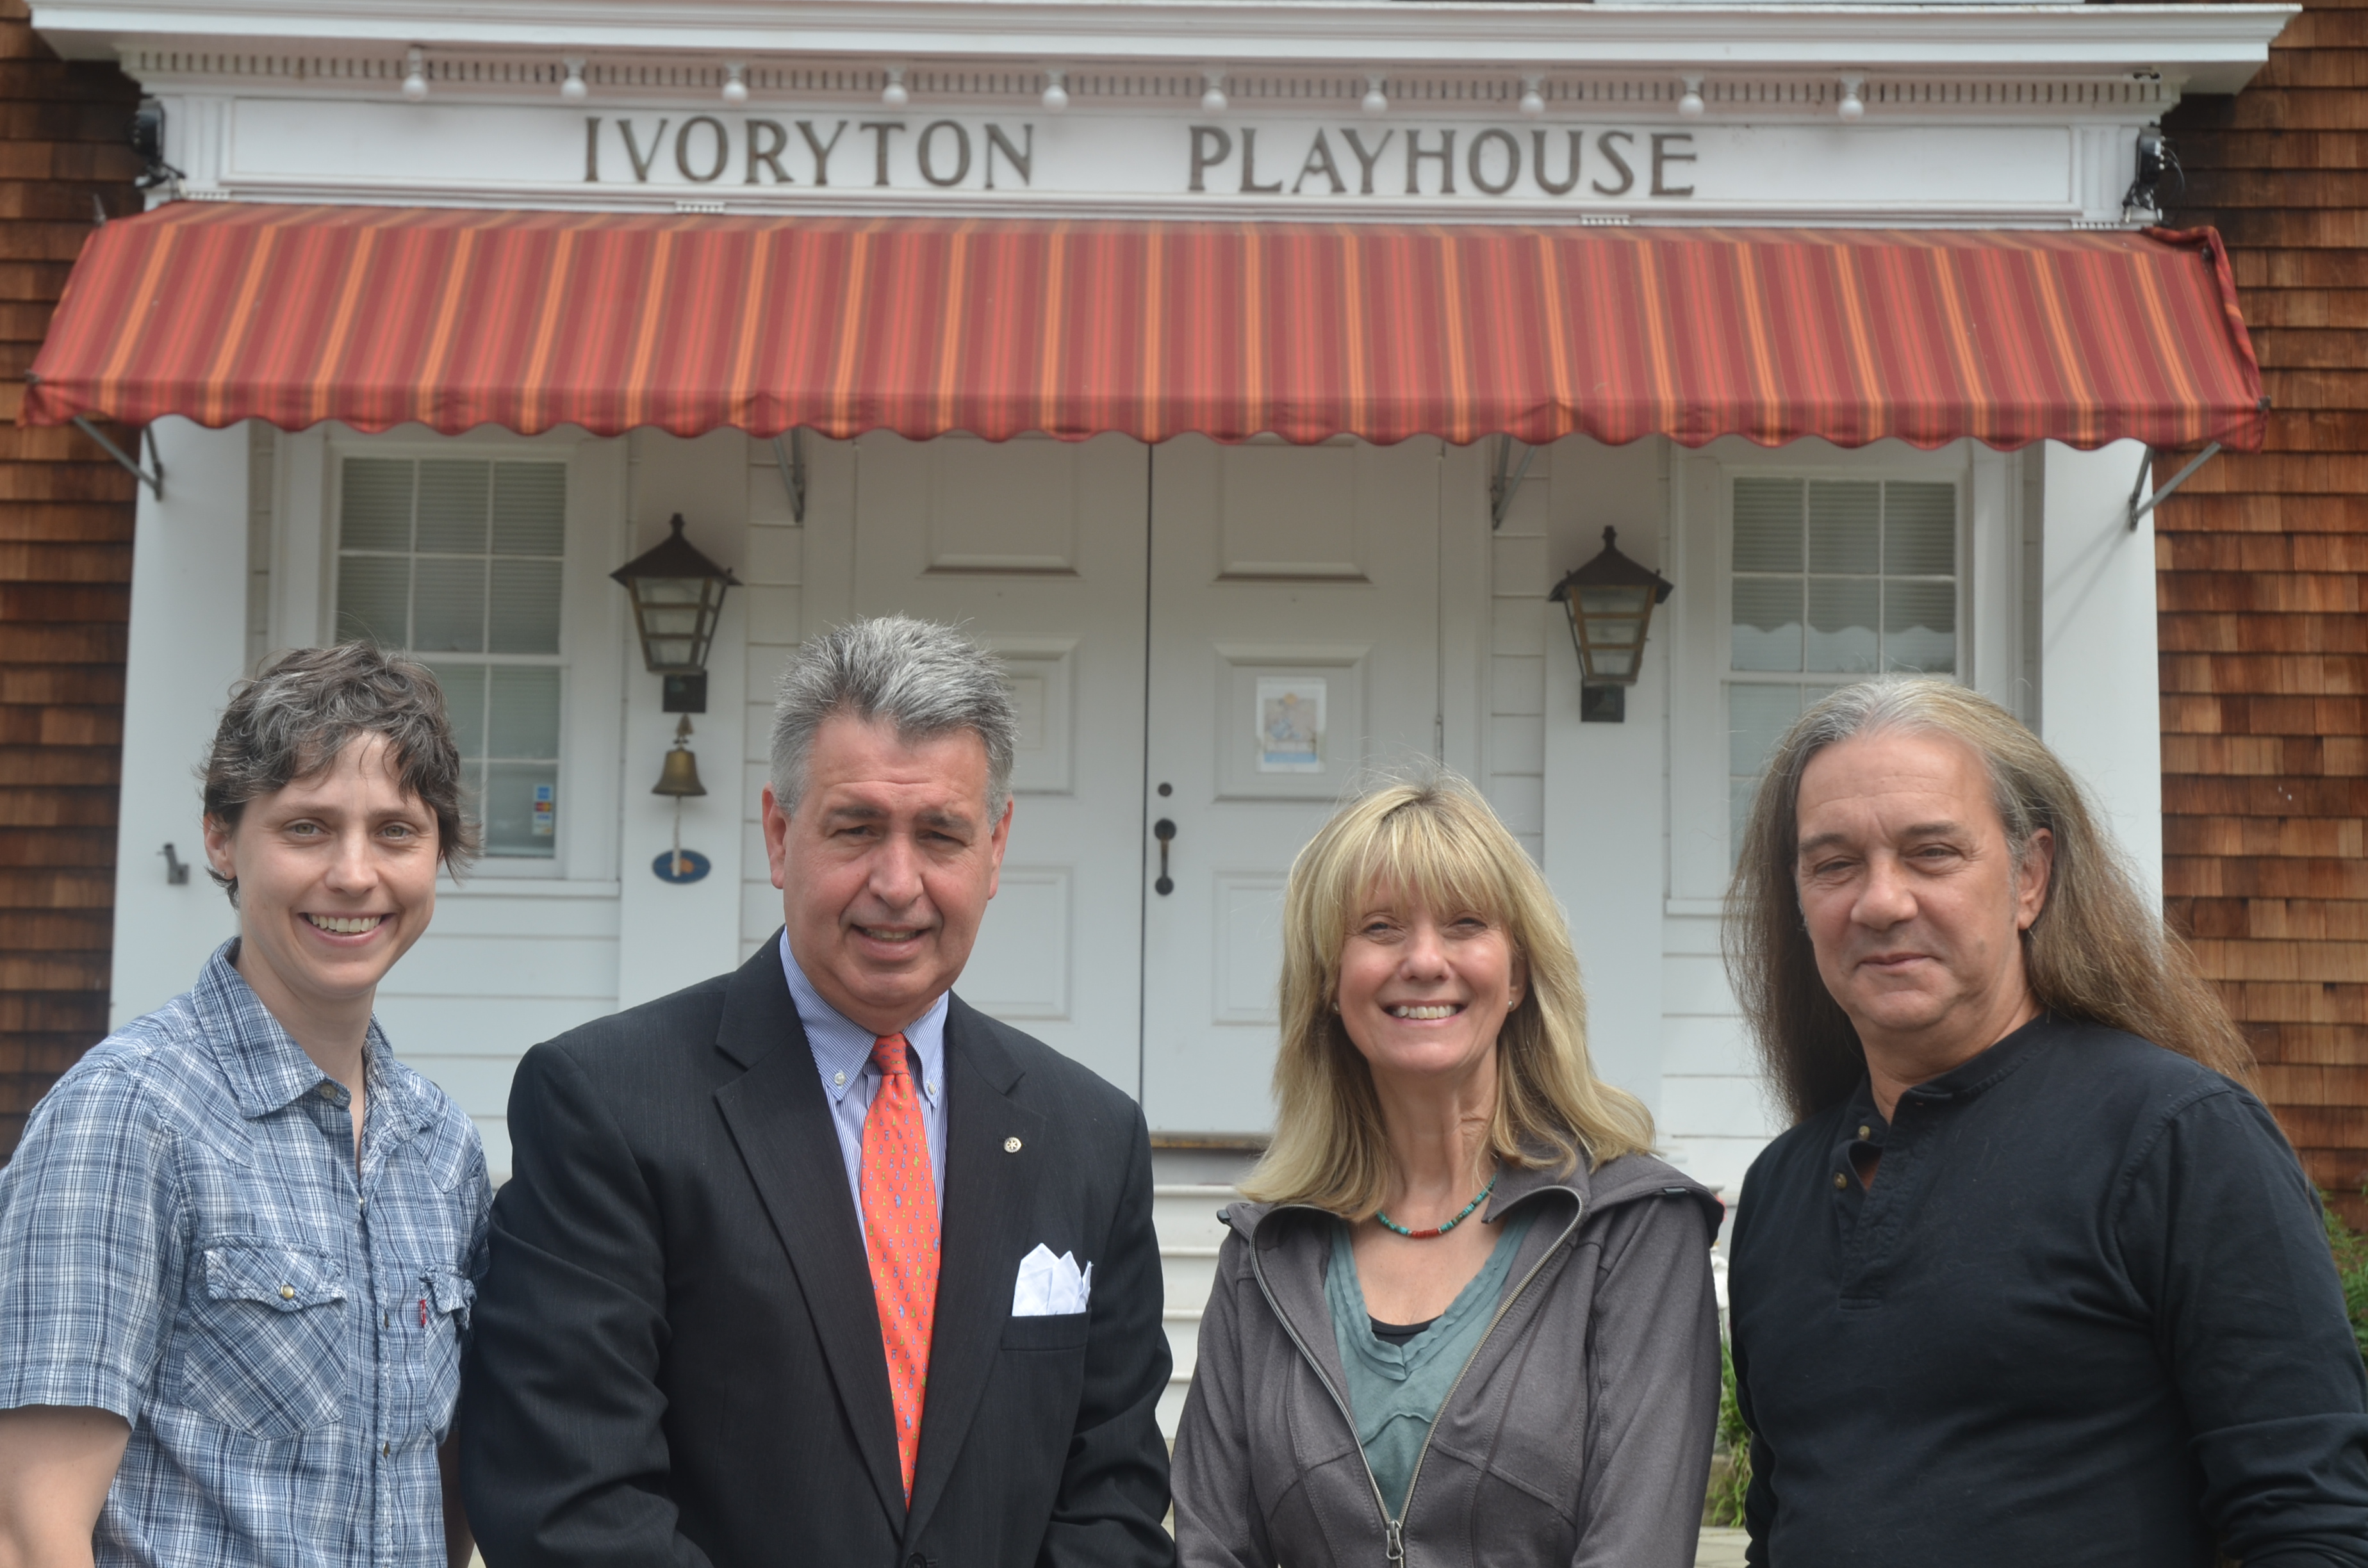 Donation to Ivoryton Playhouse for Lights